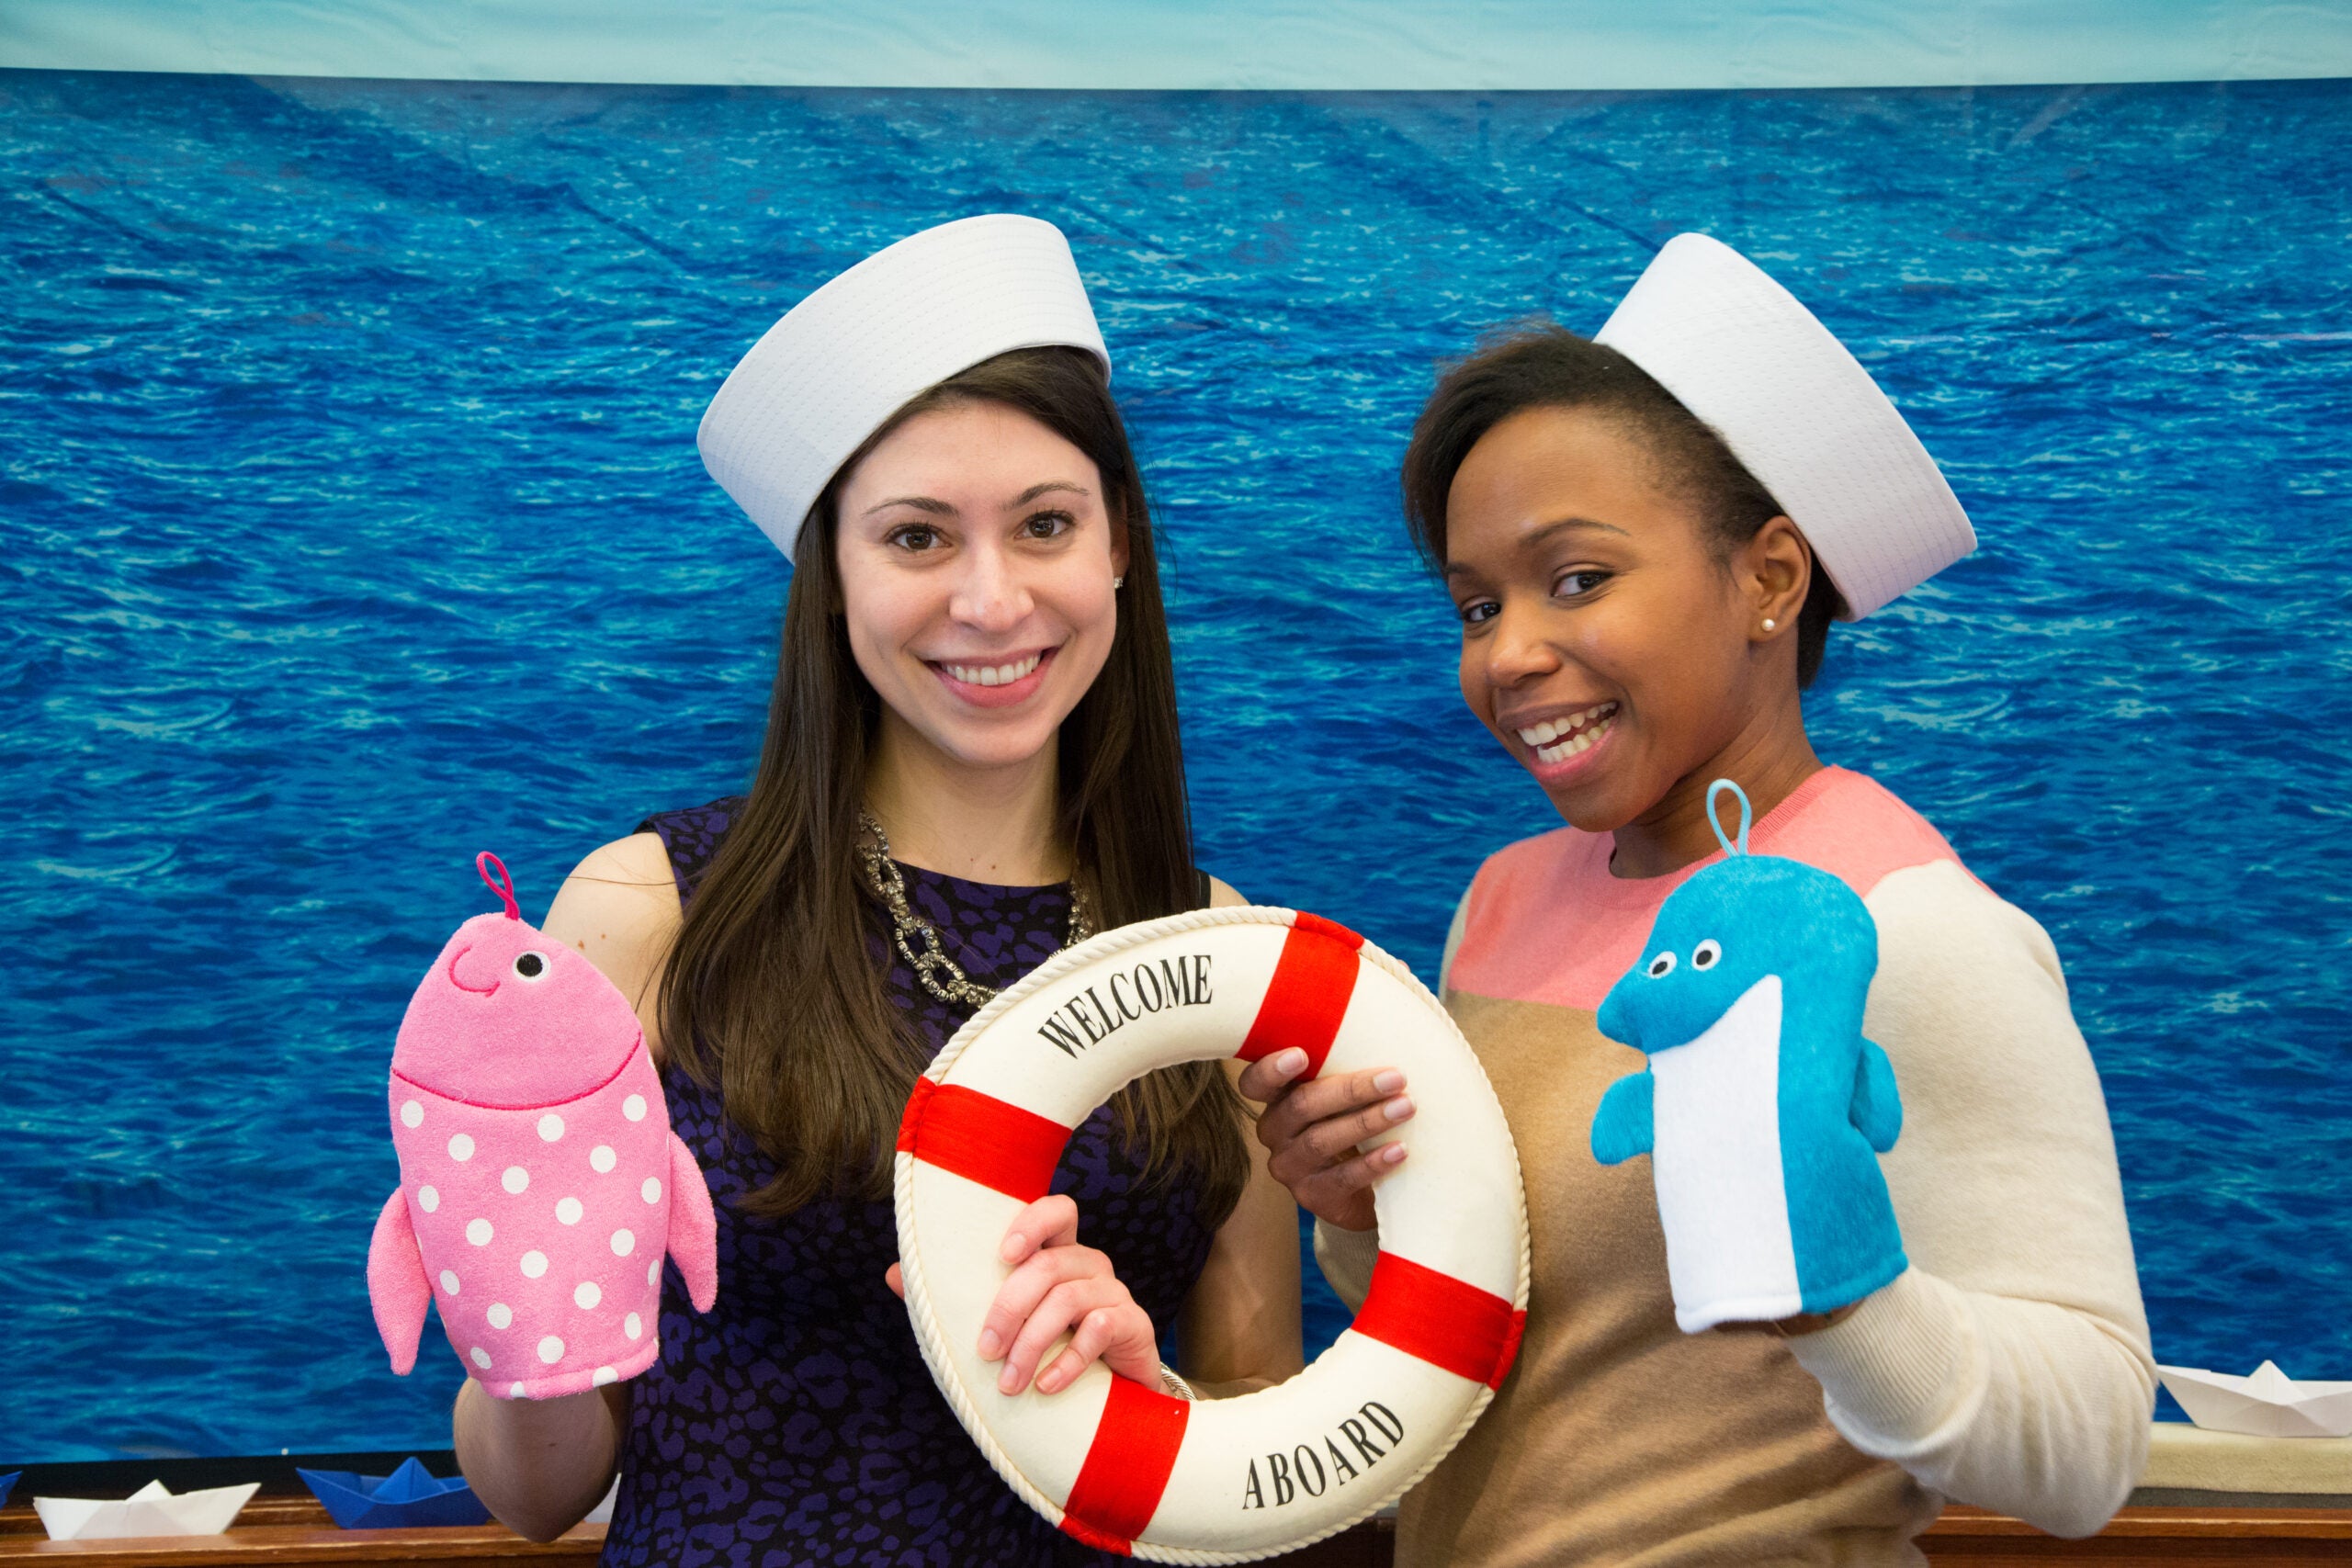 Two women posing together with marine life puppets, sailor hats, and a life preserver